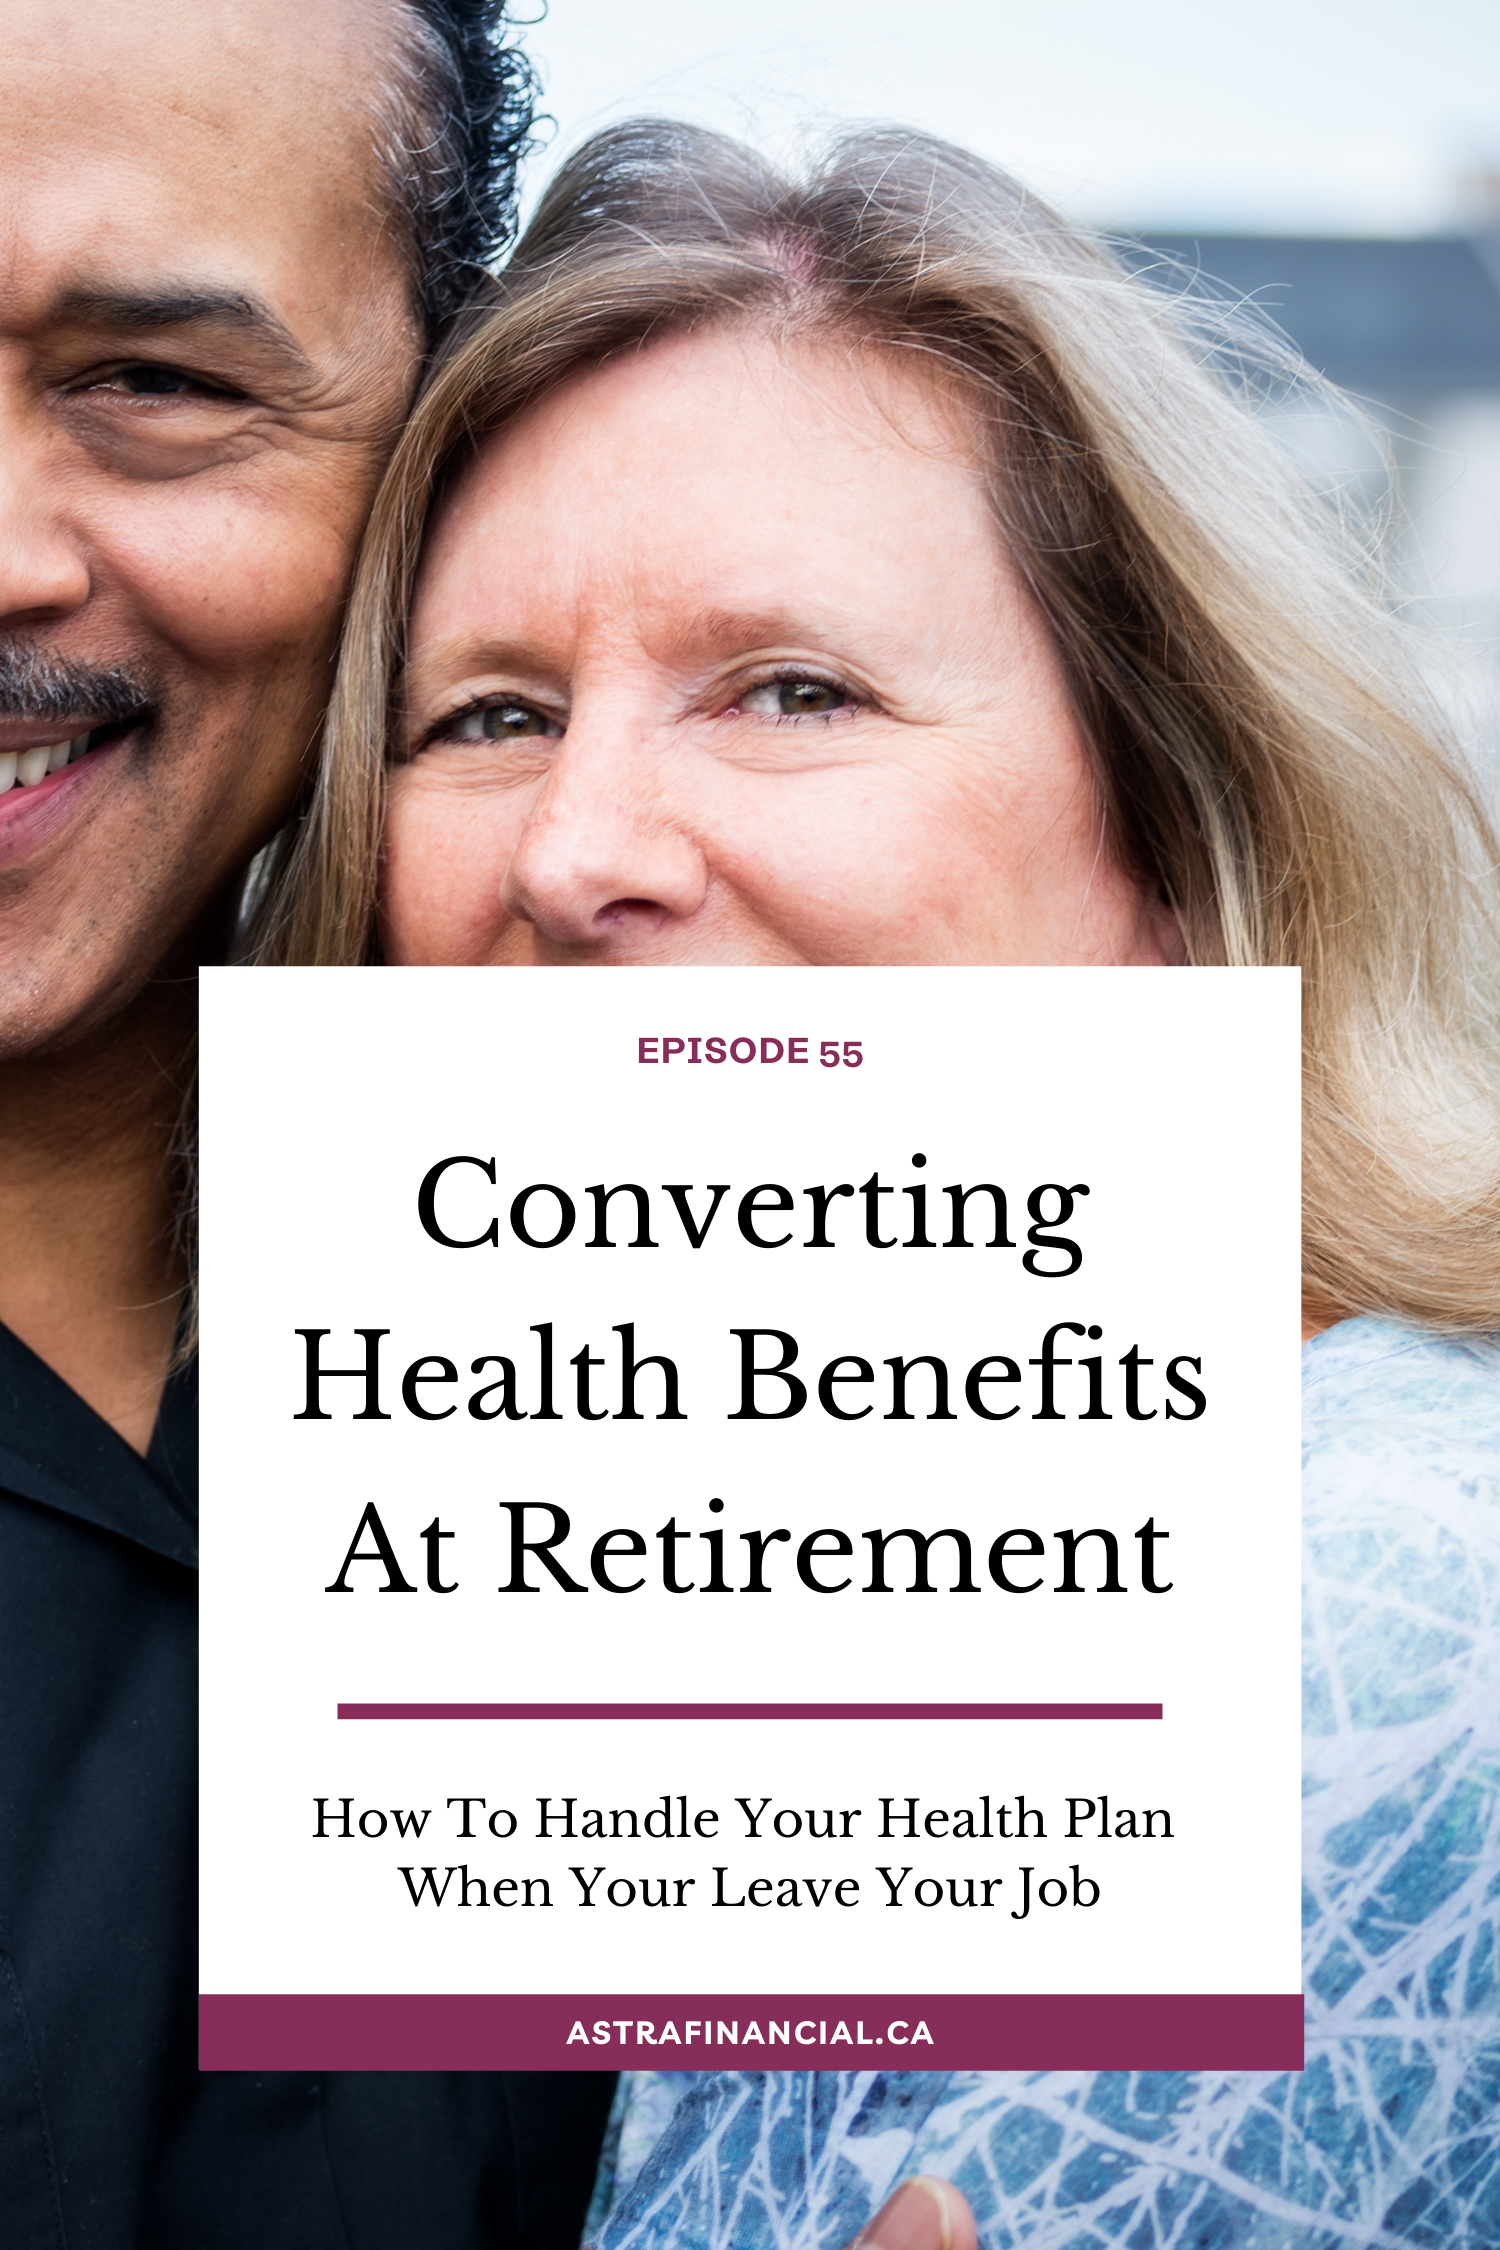 Converting Health Benefits At Retirement by Astra Financial